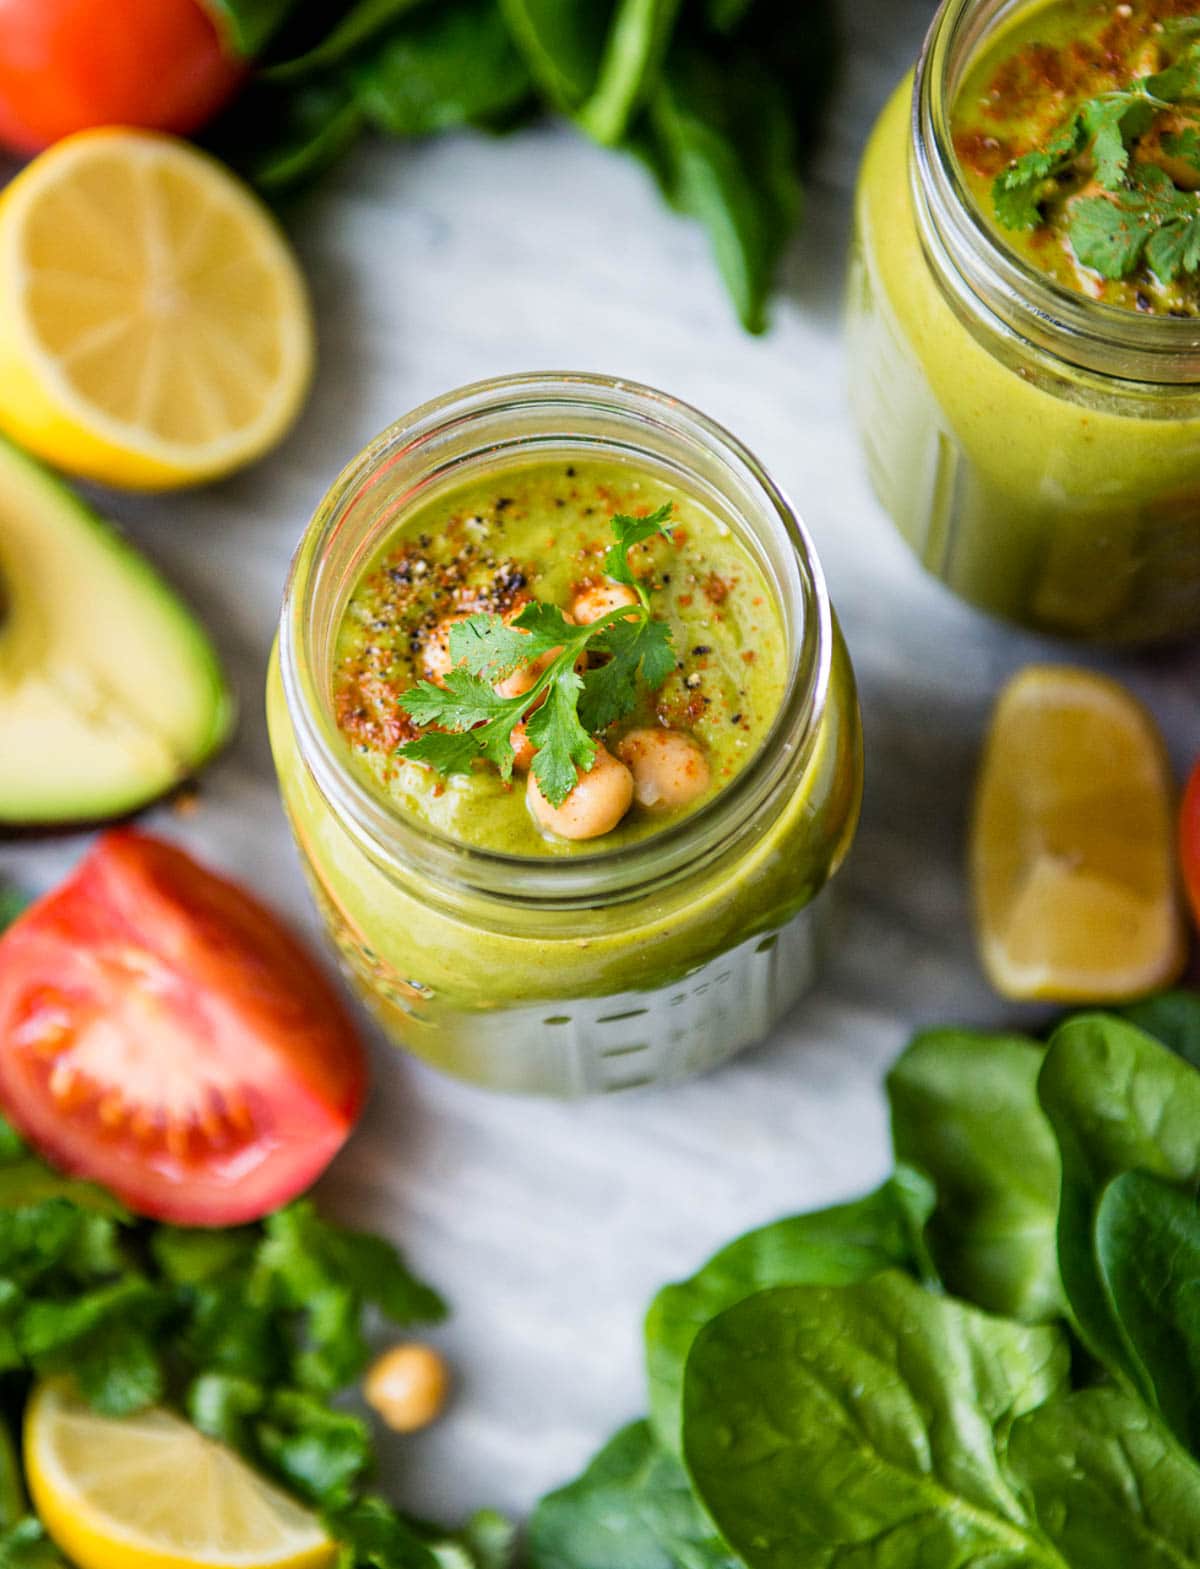 2 savory smoothies topped with chickpeas, cilantro and spices.